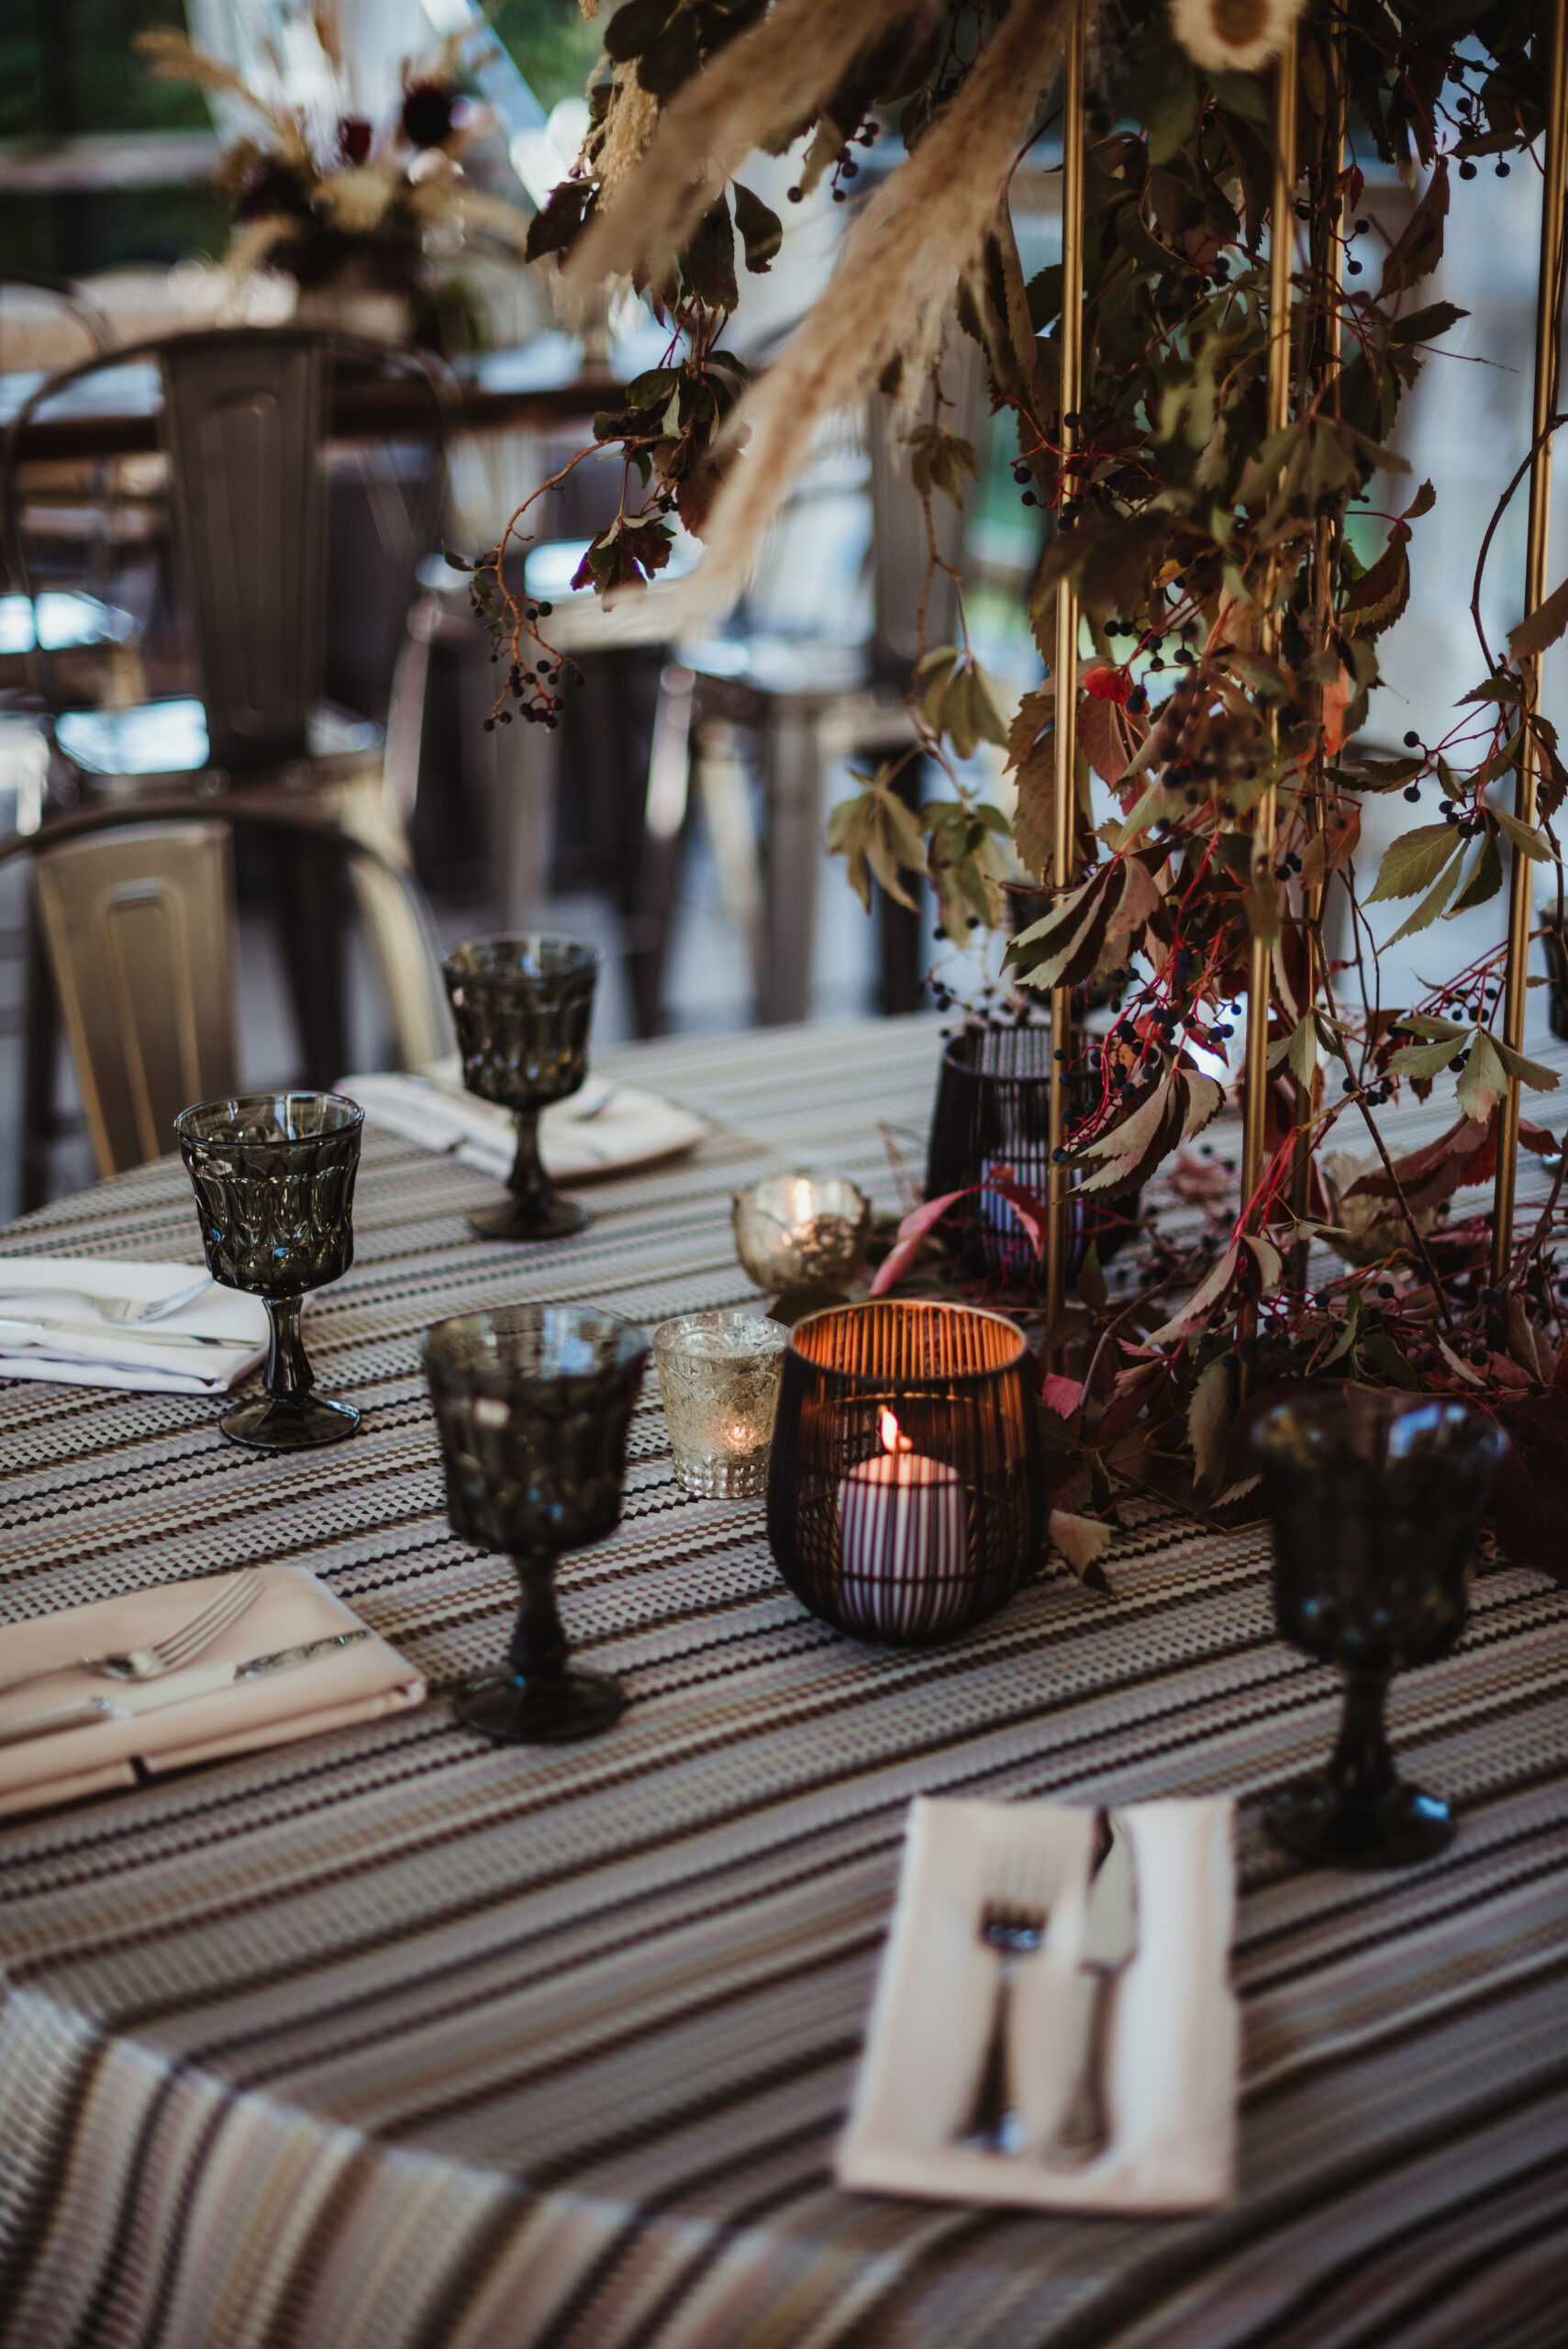 Dark glasses and napkins with silverware are set around a moody fall table setting with candles and leaves.